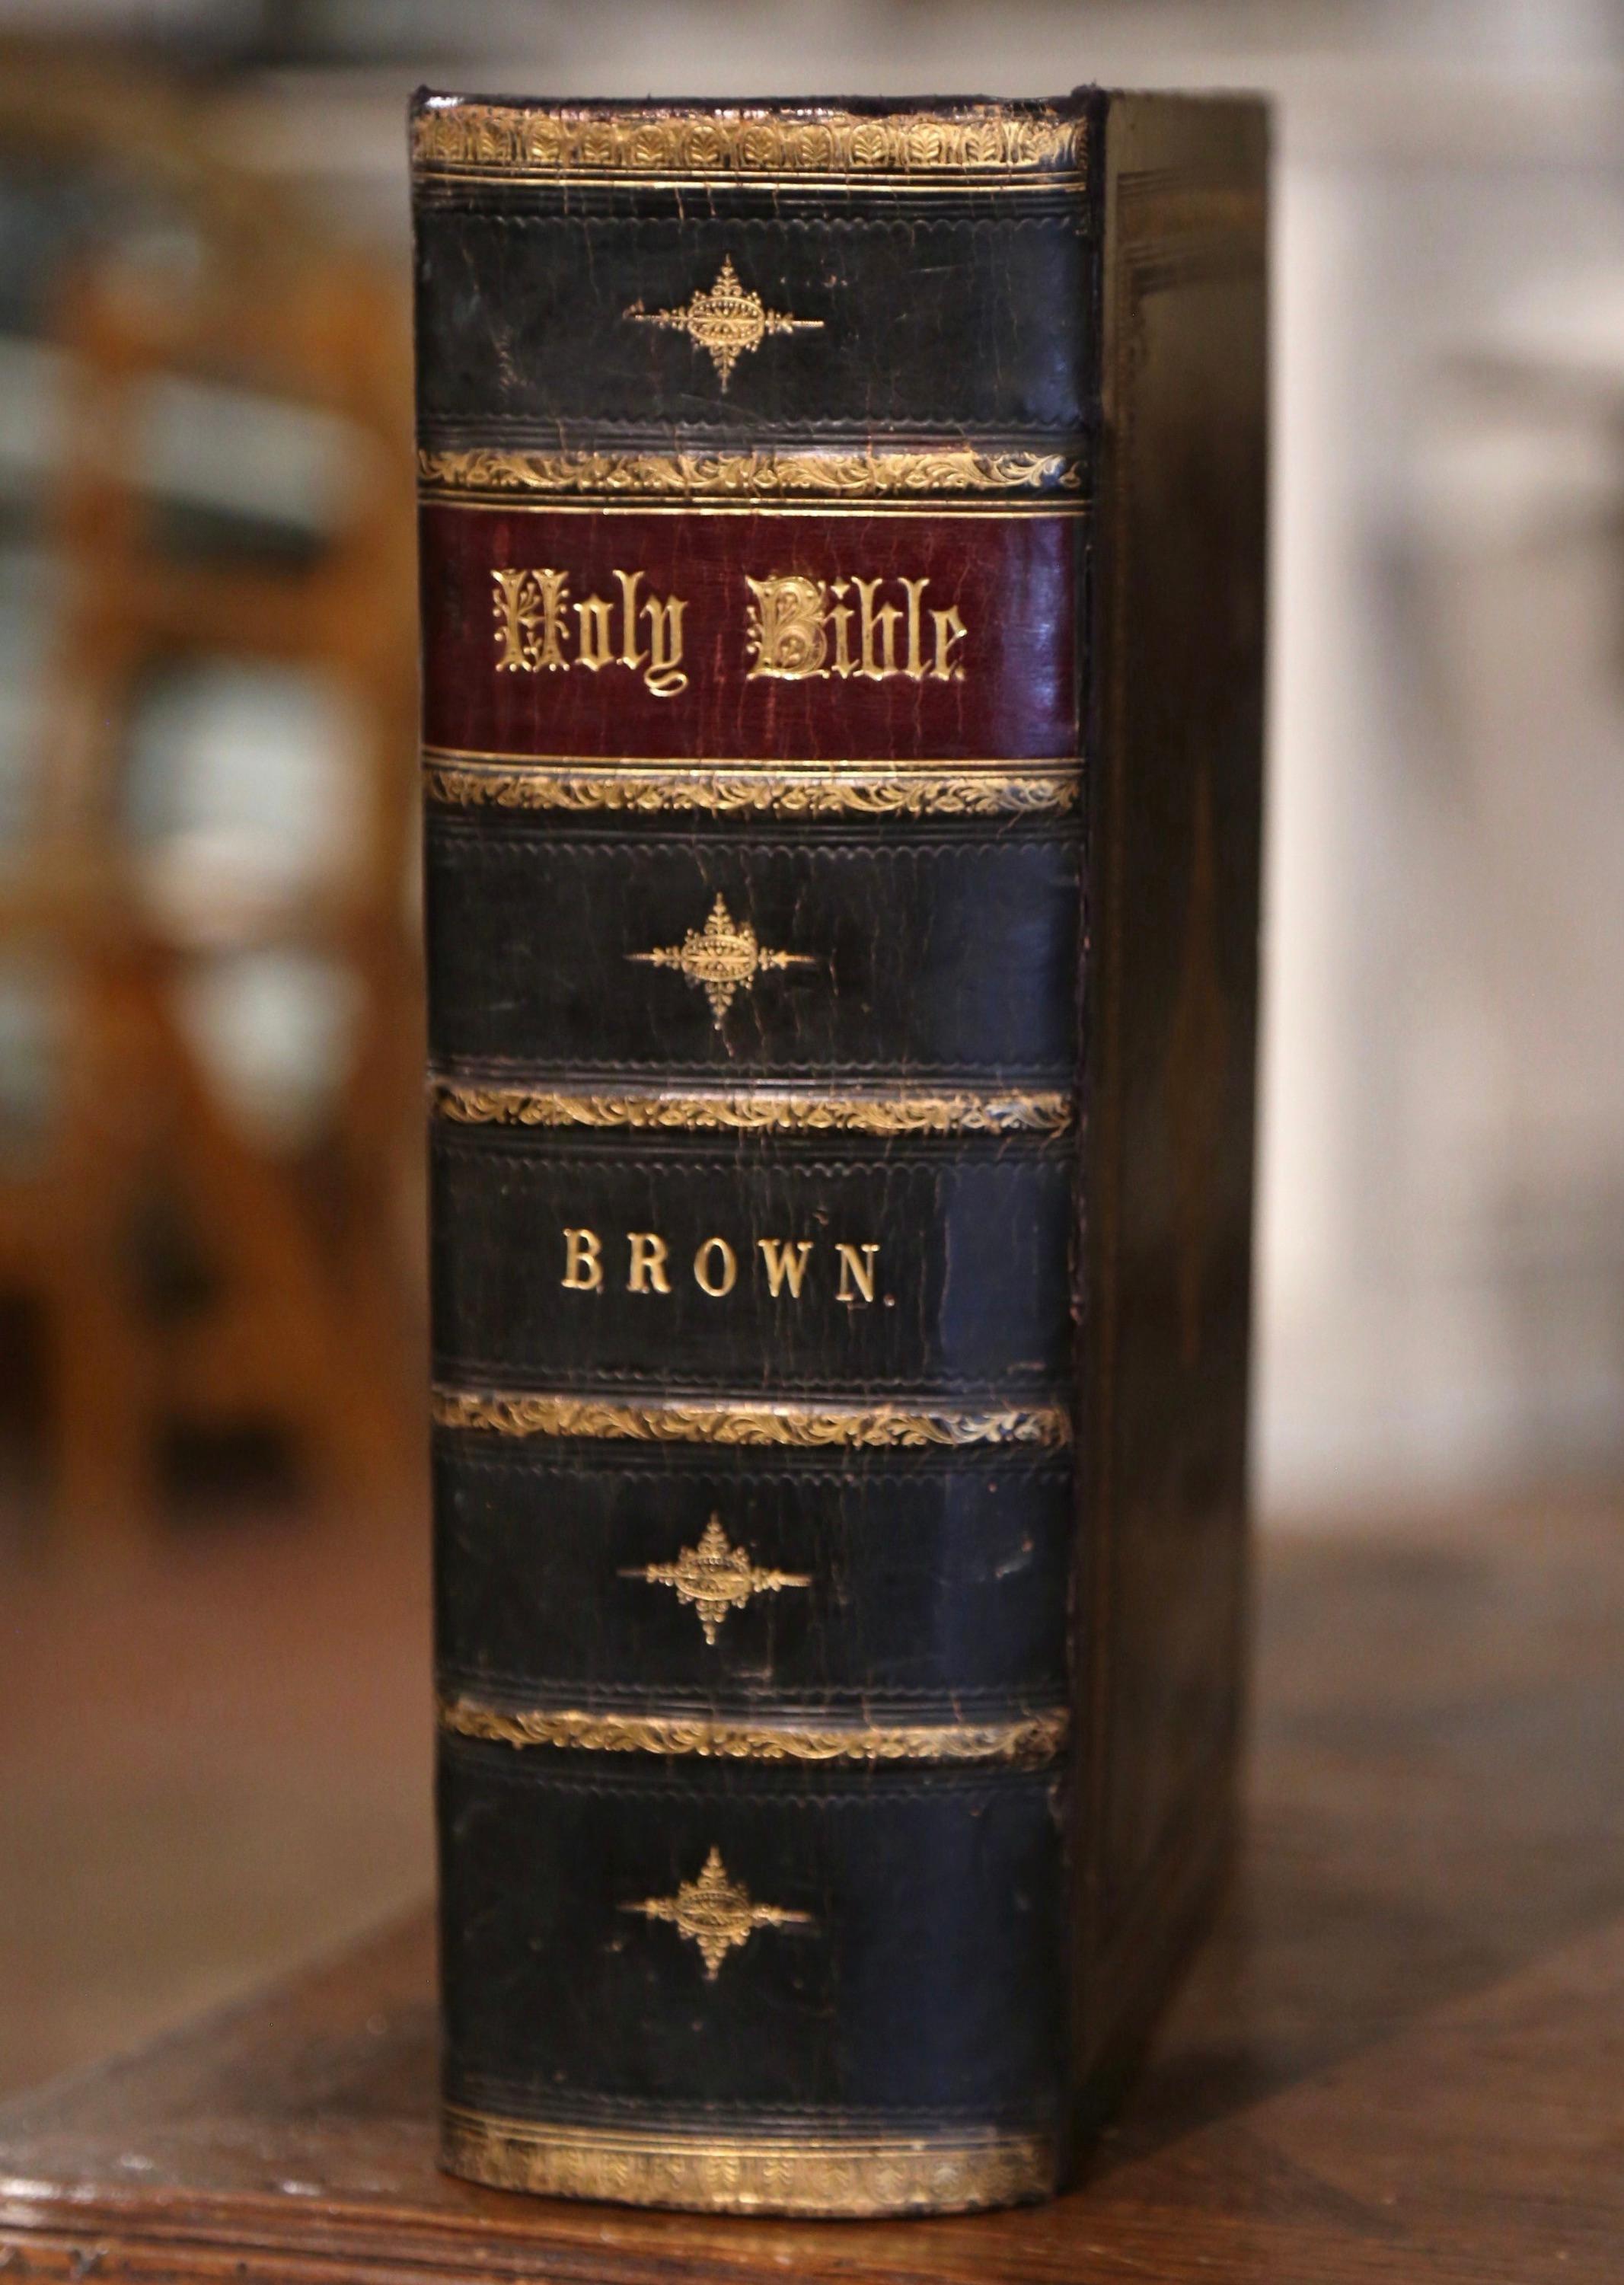 This beautiful antique Holy Bible was printed in the United Kingdom by Blackie and Son dated 1864. Black leather bound, the bible flaunts an engraved and embossed gilt covering with a center medallion, and the spine is engraved with 